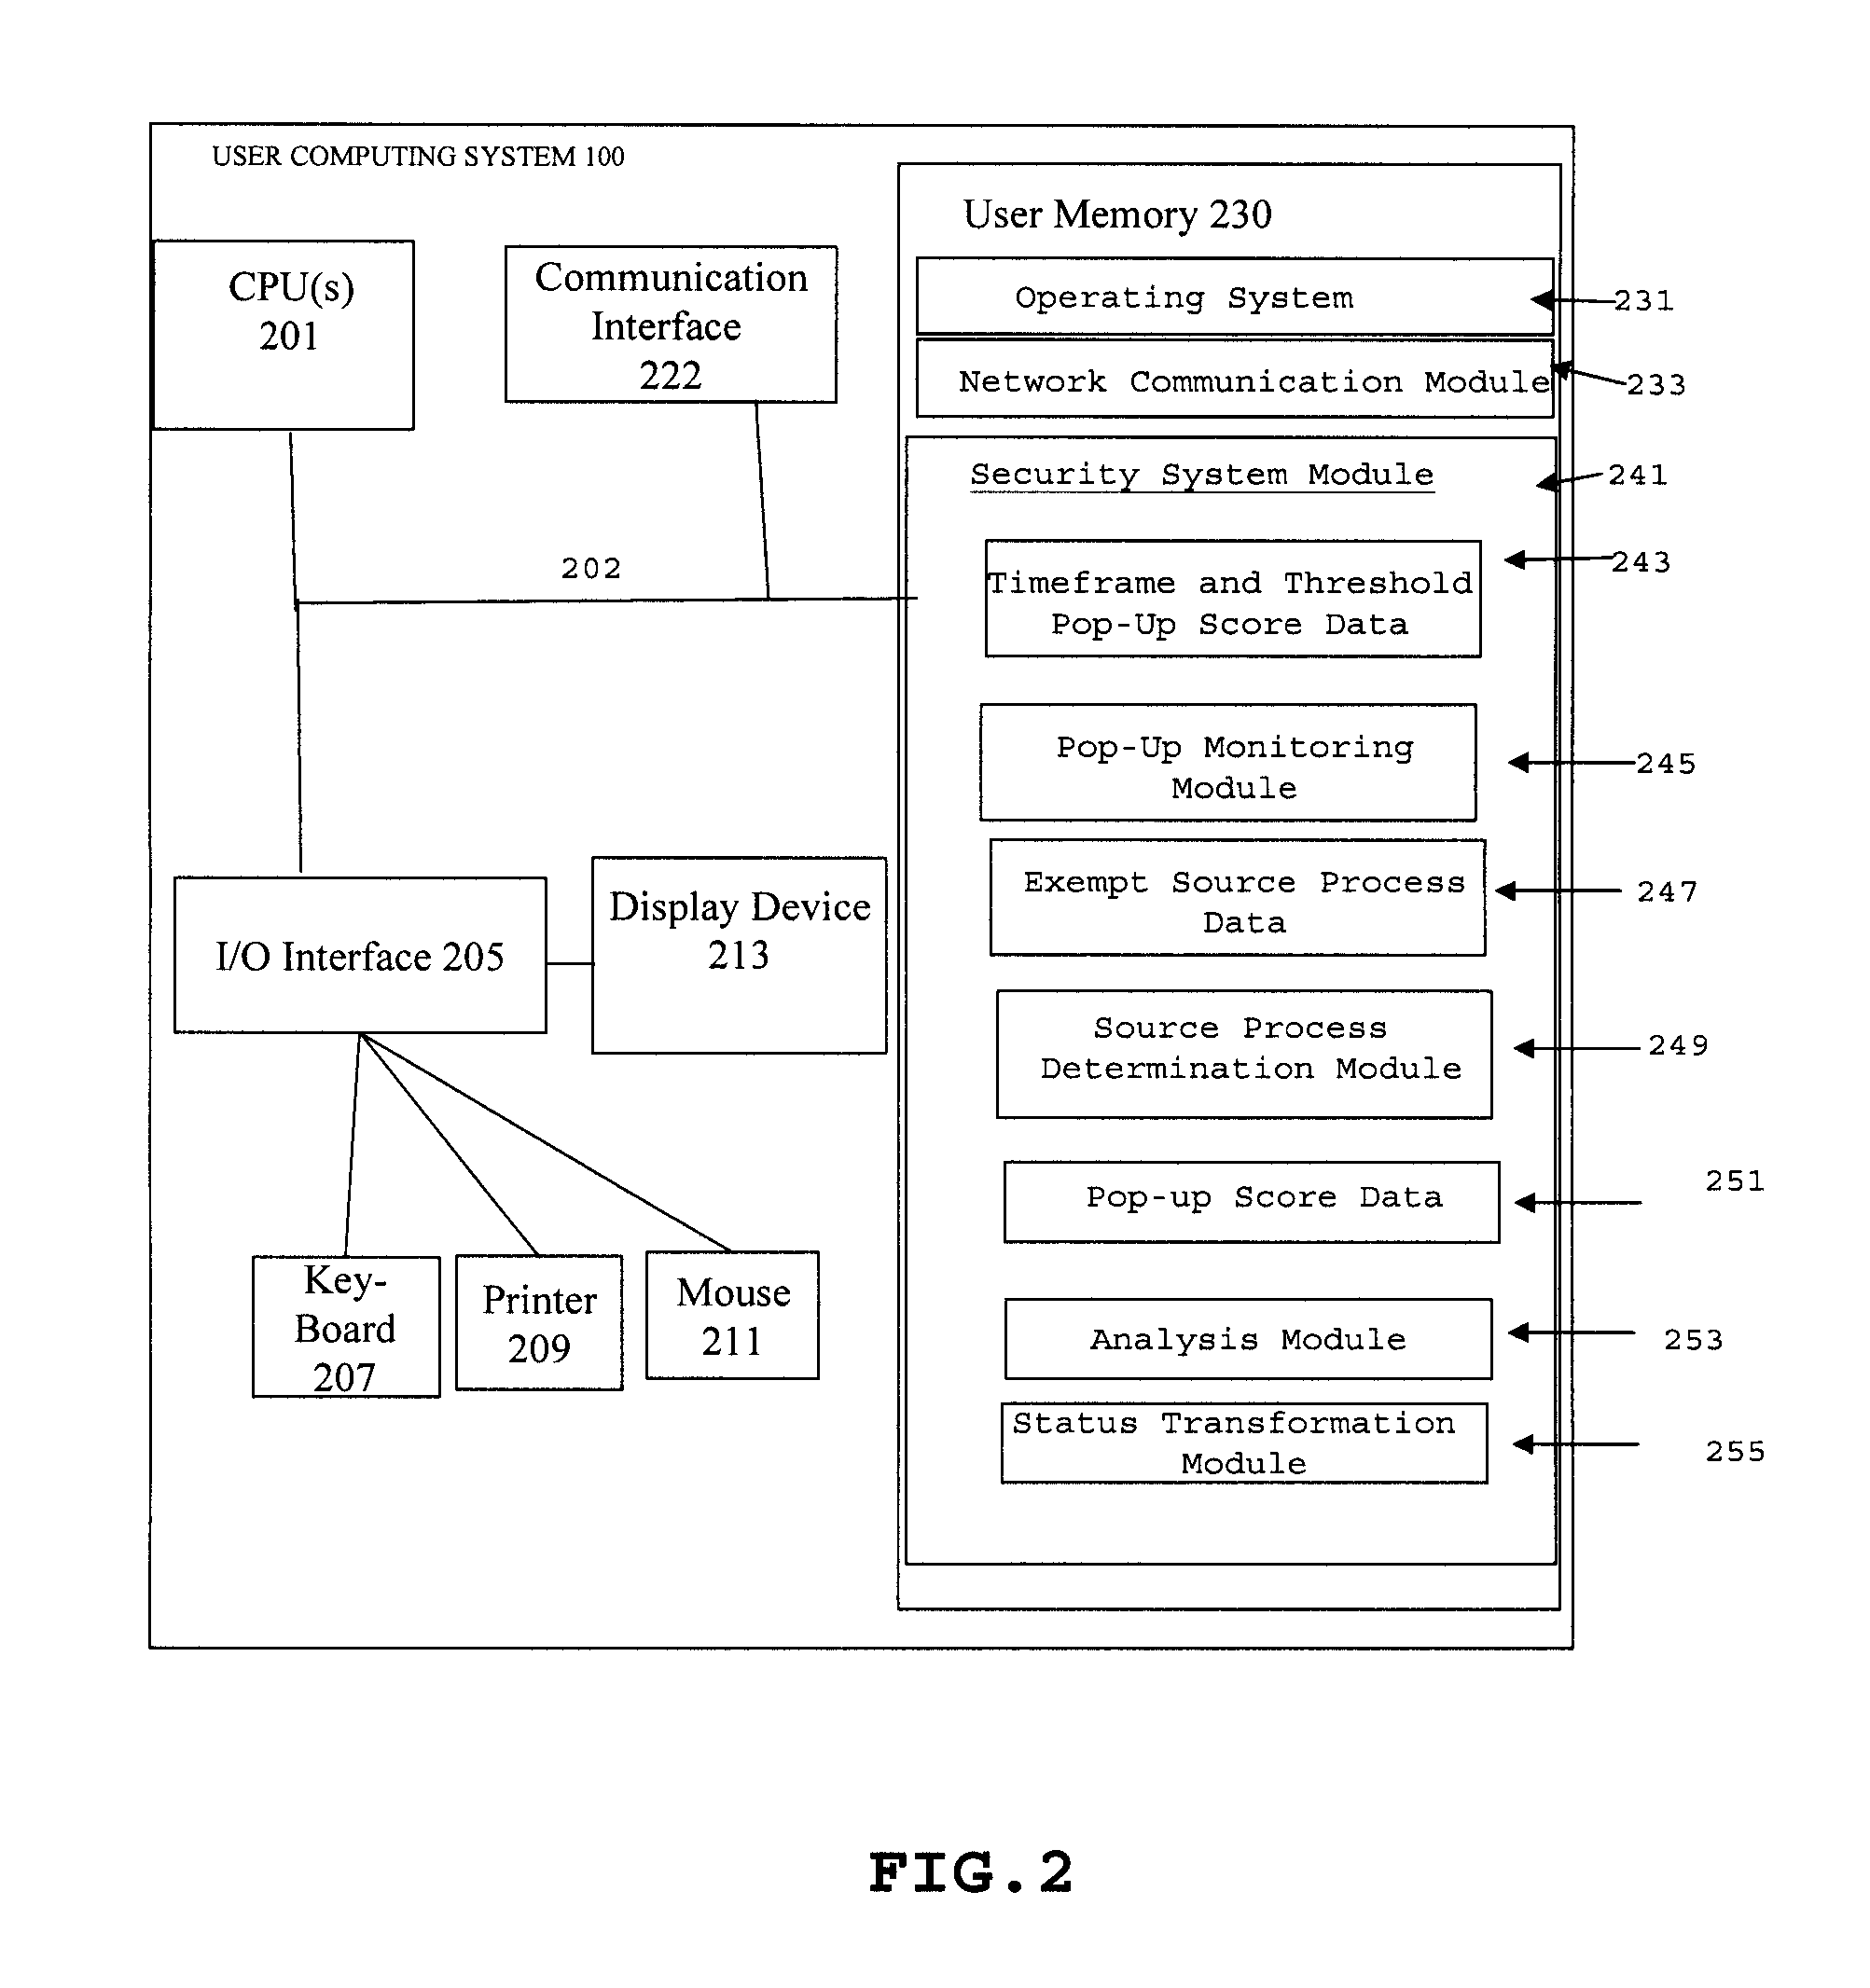 Method and system for detecting rogue security software that displays frequent misleading warnings